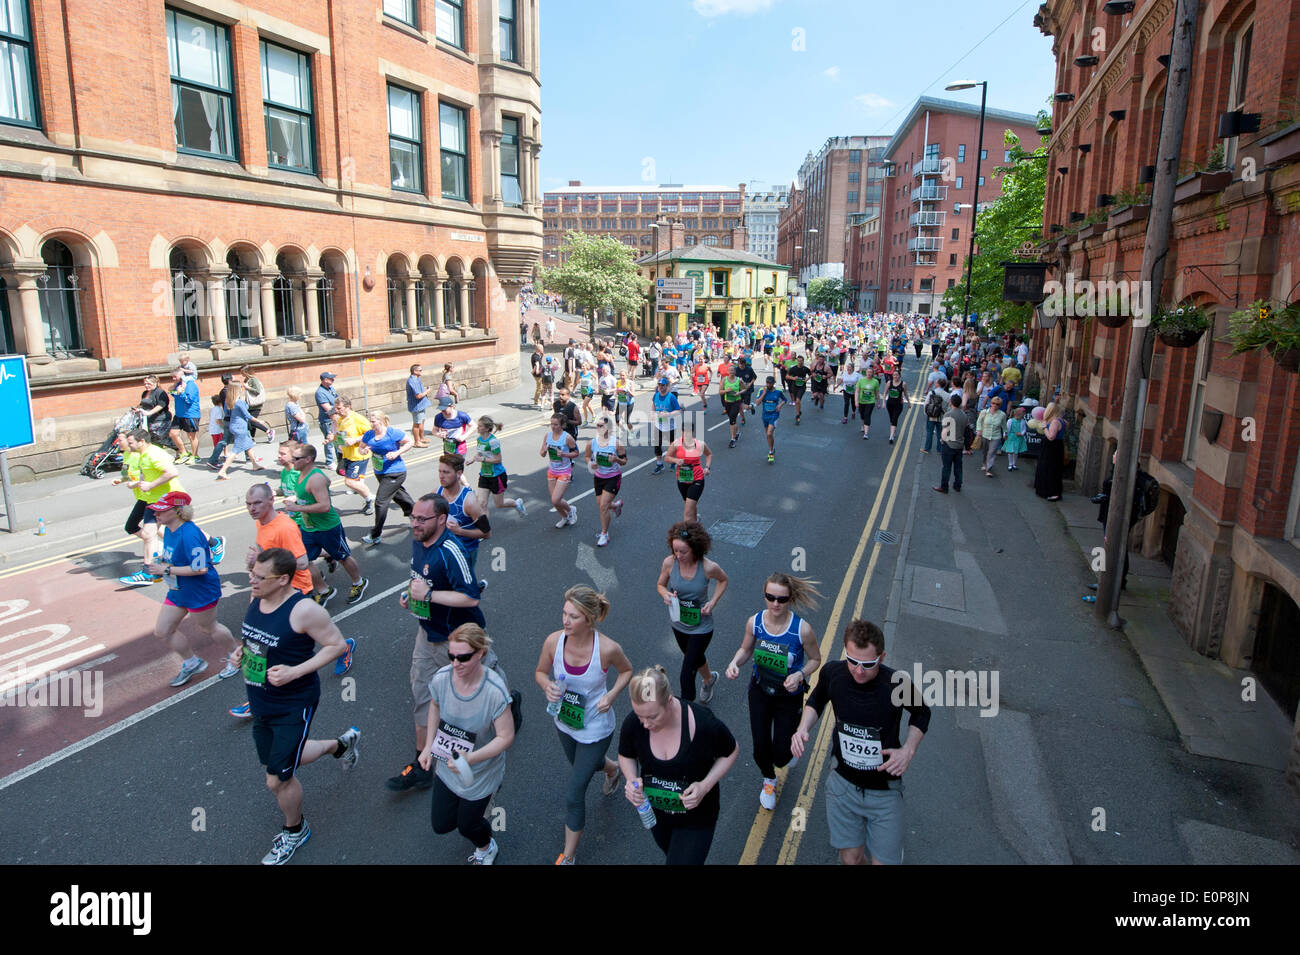 MANCHESTER, UK. 18th May 2014. Thousands of competitors take part in the 2014 Bupa Great Manchester Run, which is both an elite and mass participation event. Now in it's 12th year, it is Europe's biggest 10k running event. Credit:  Russell Hart/Alamy Live News. Stock Photo